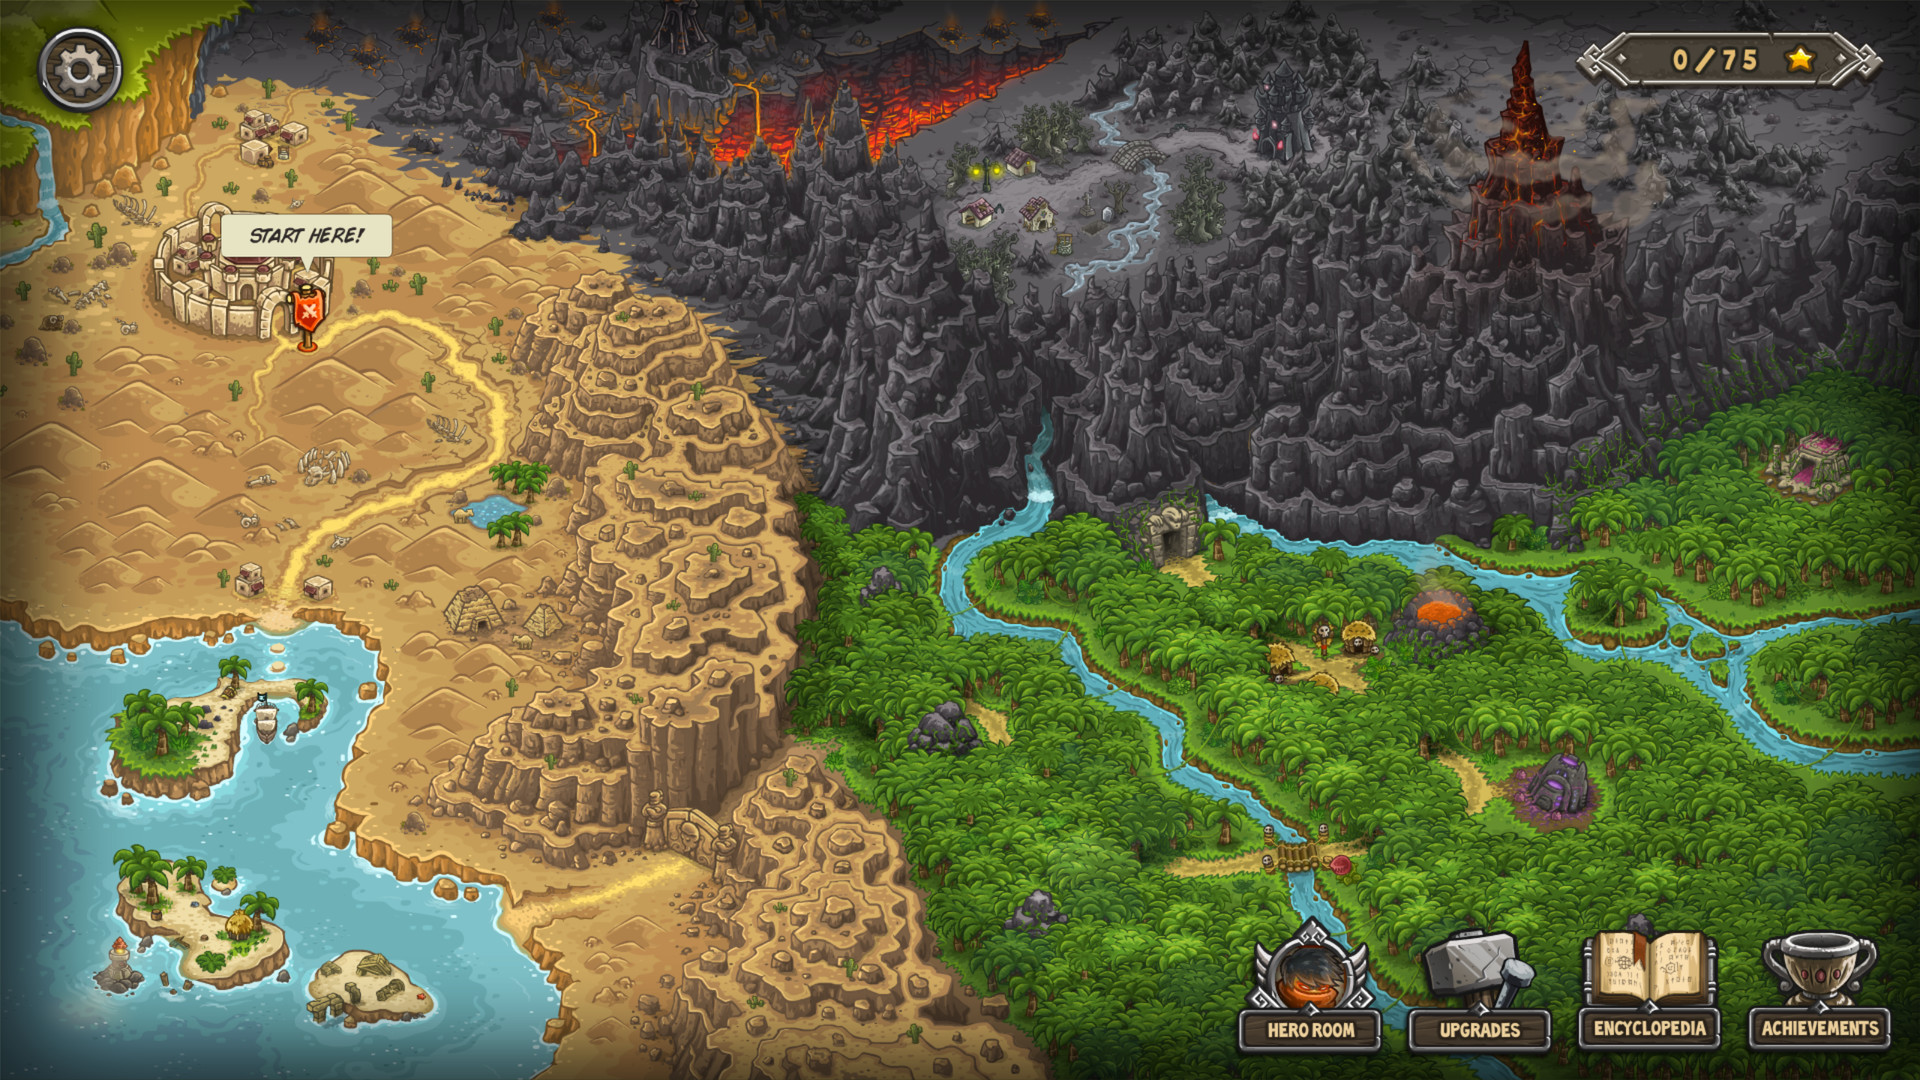 Find the best laptops for Kingdom Rush Frontiers - Tower Defense